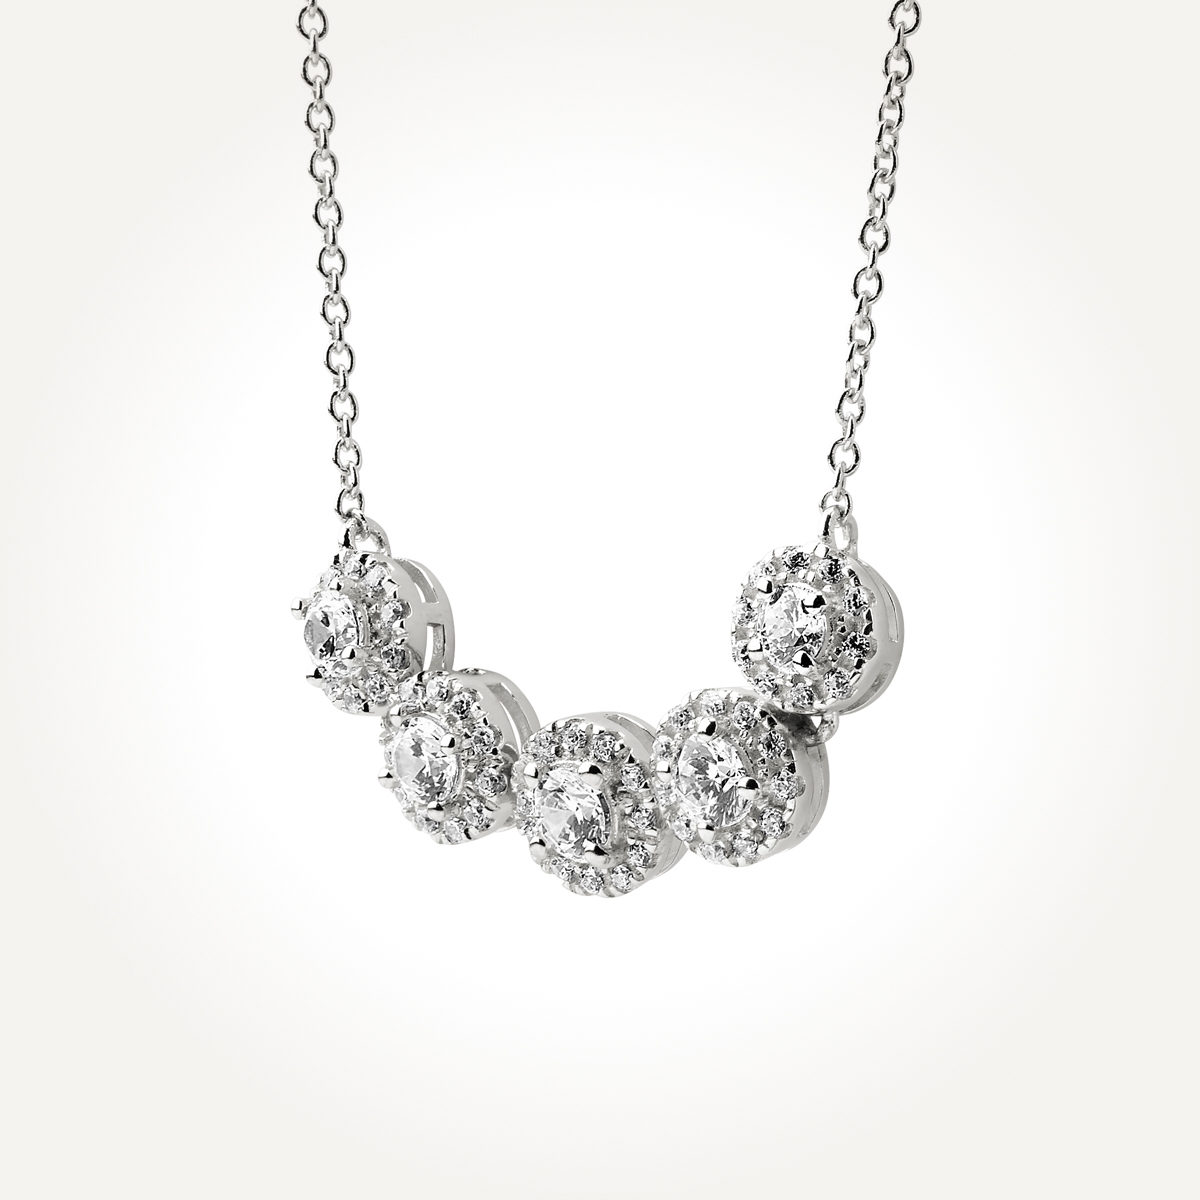 14KT White Gold Five Stone Halo Necklace